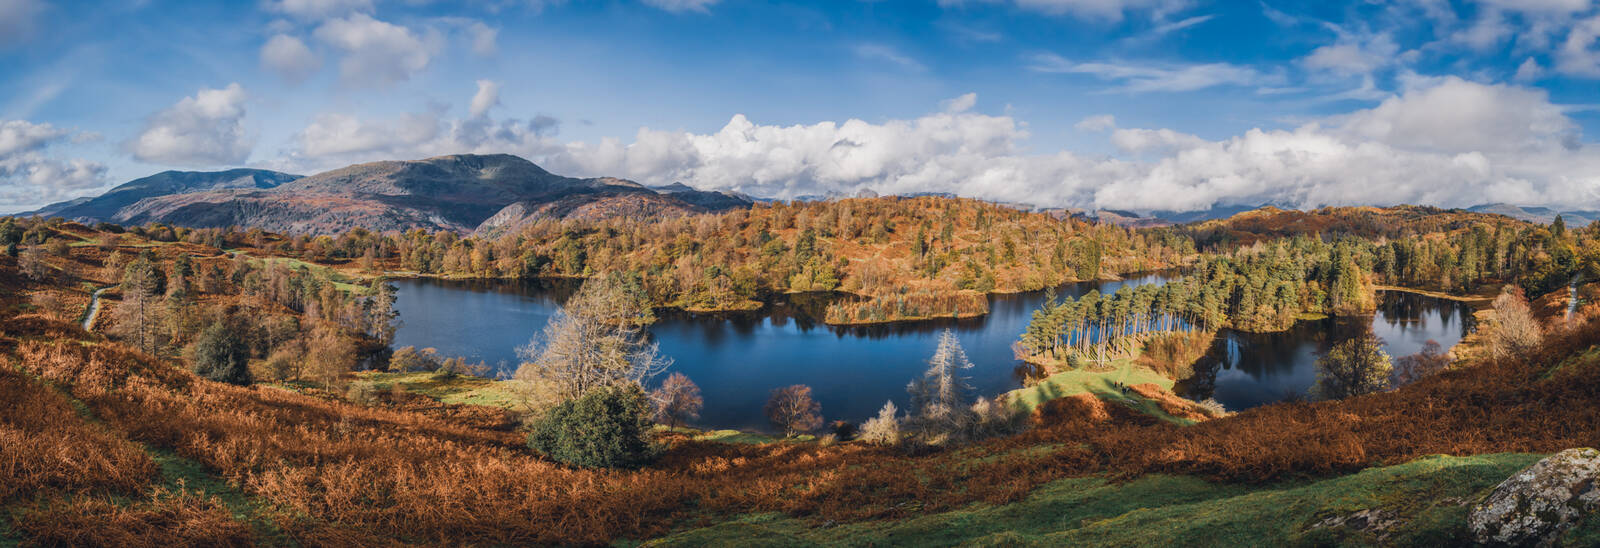 Image of Tarn Hows, Lake District by James Billings.